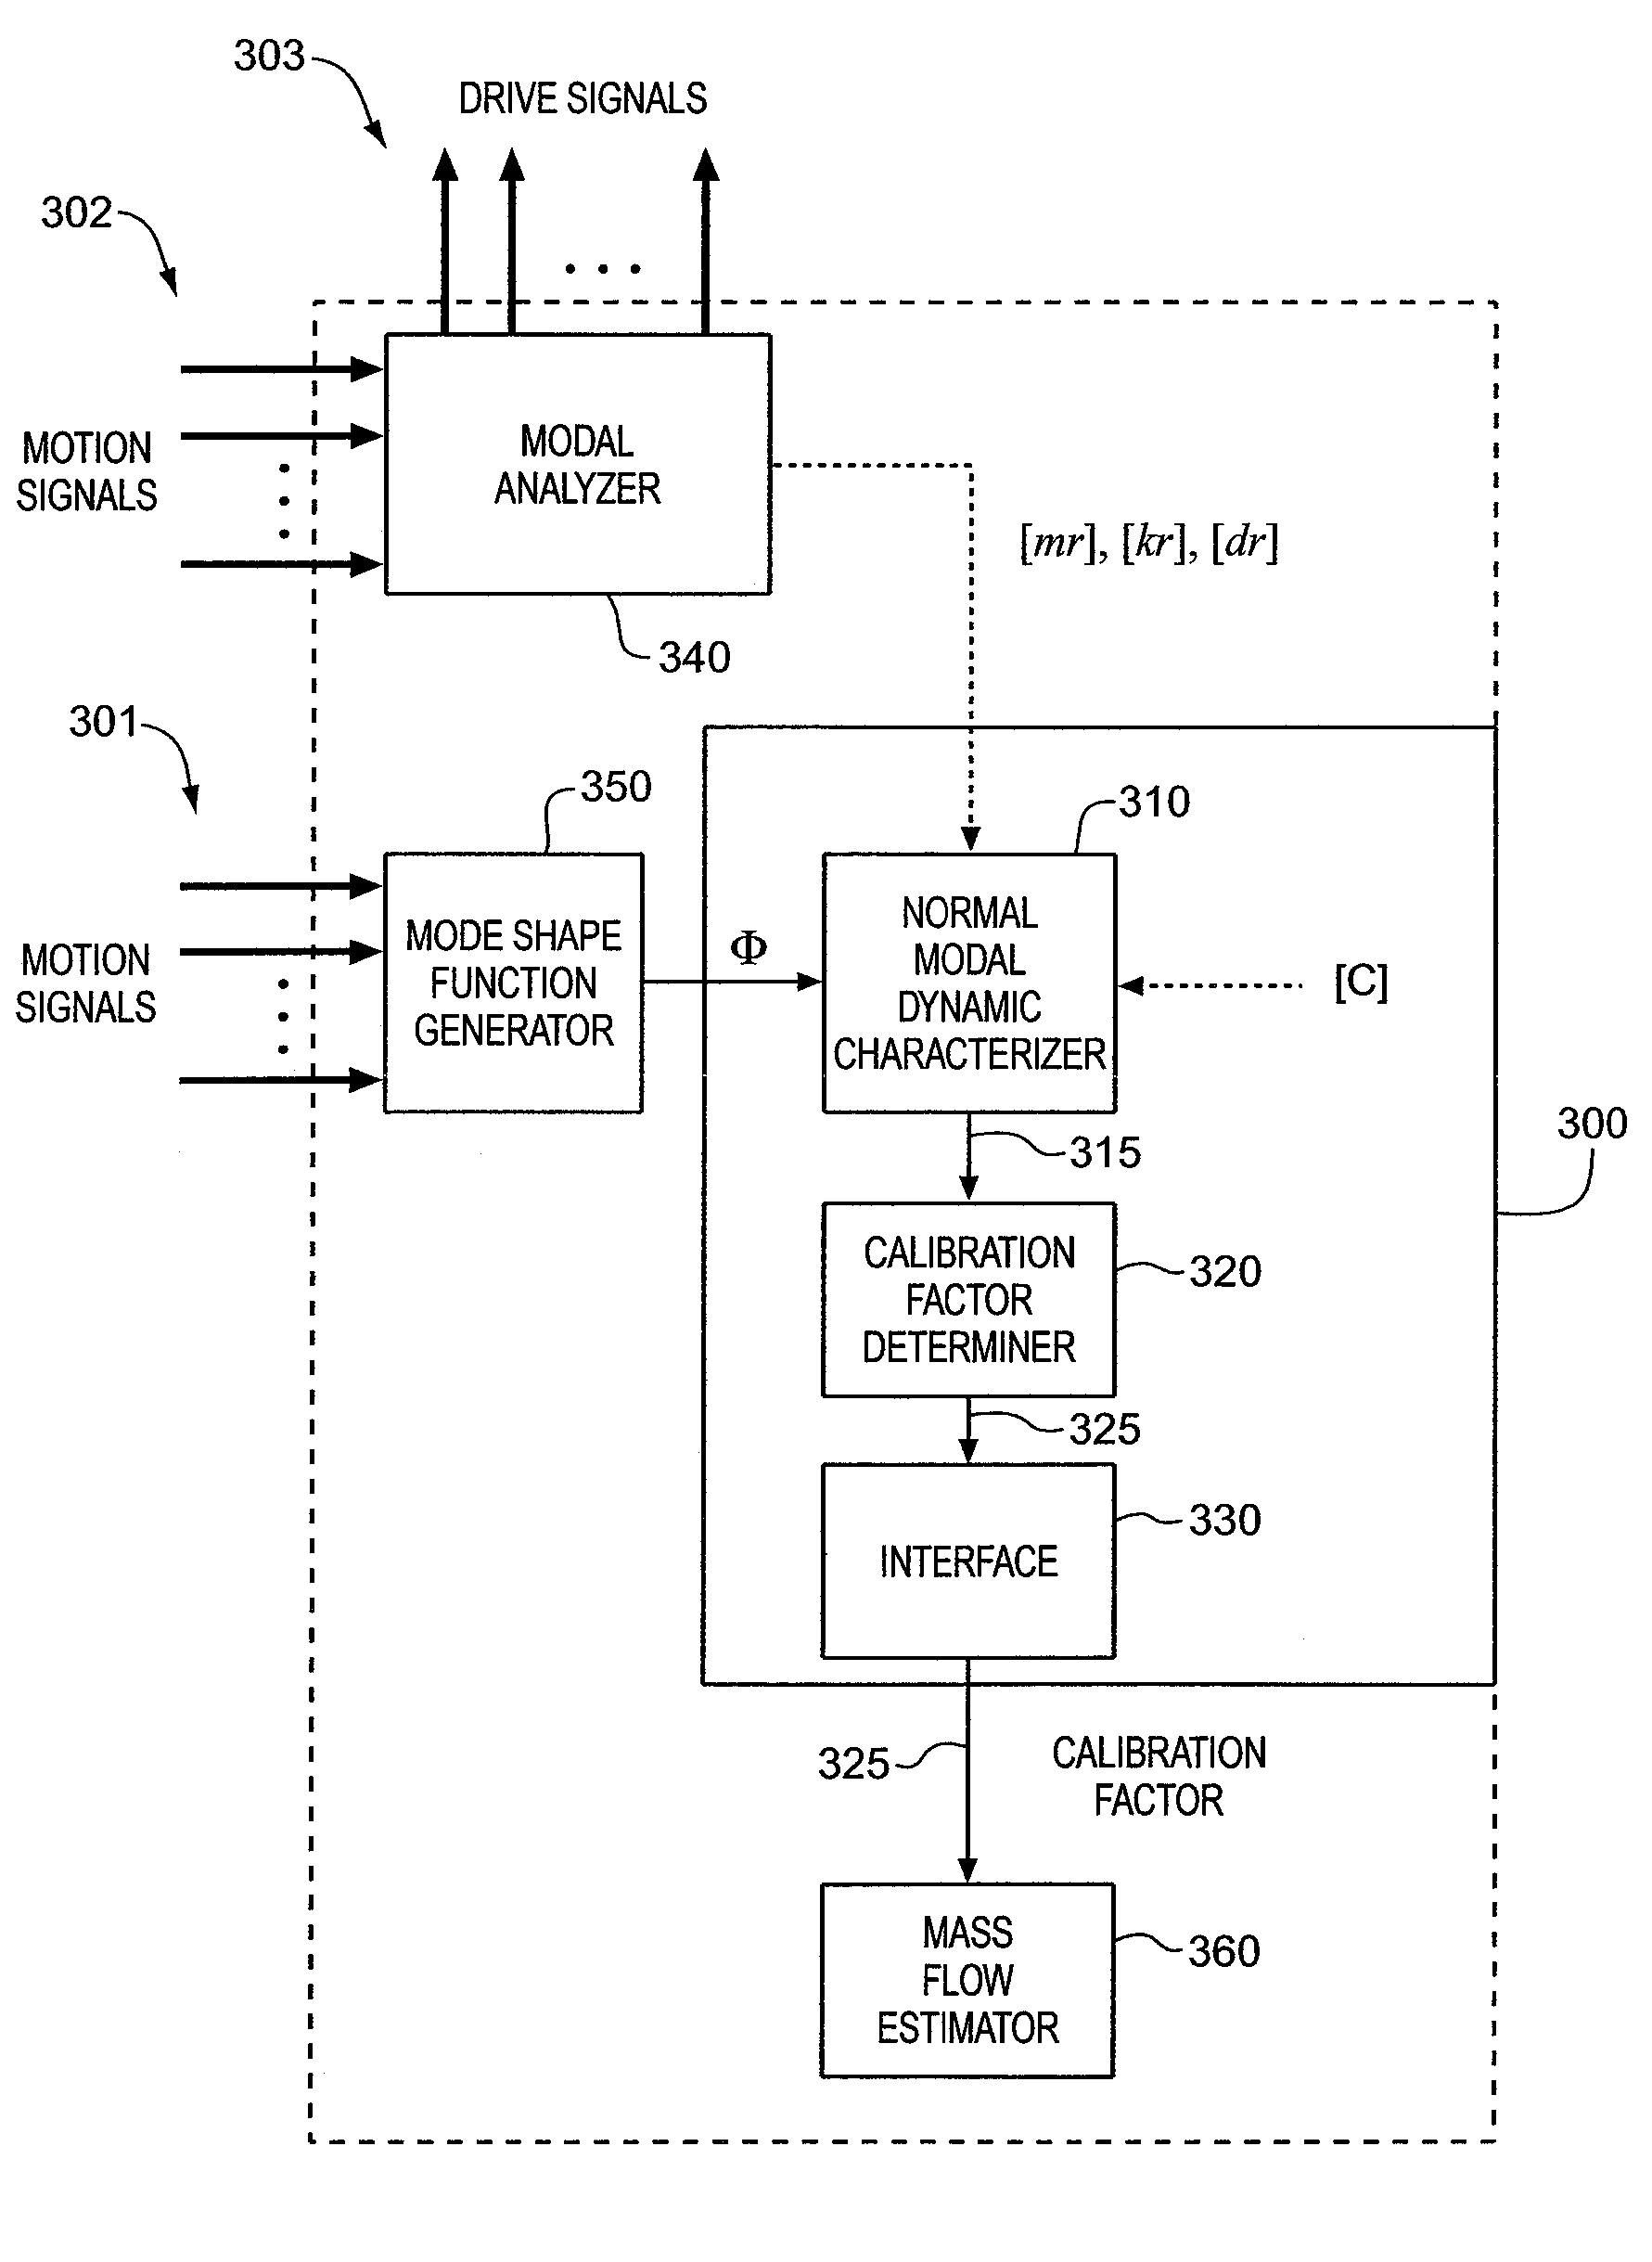 Apparatus, methods and computer program products for generating mass flow calibration factors using a normal modal dynamic characterization of a material-contained conduit